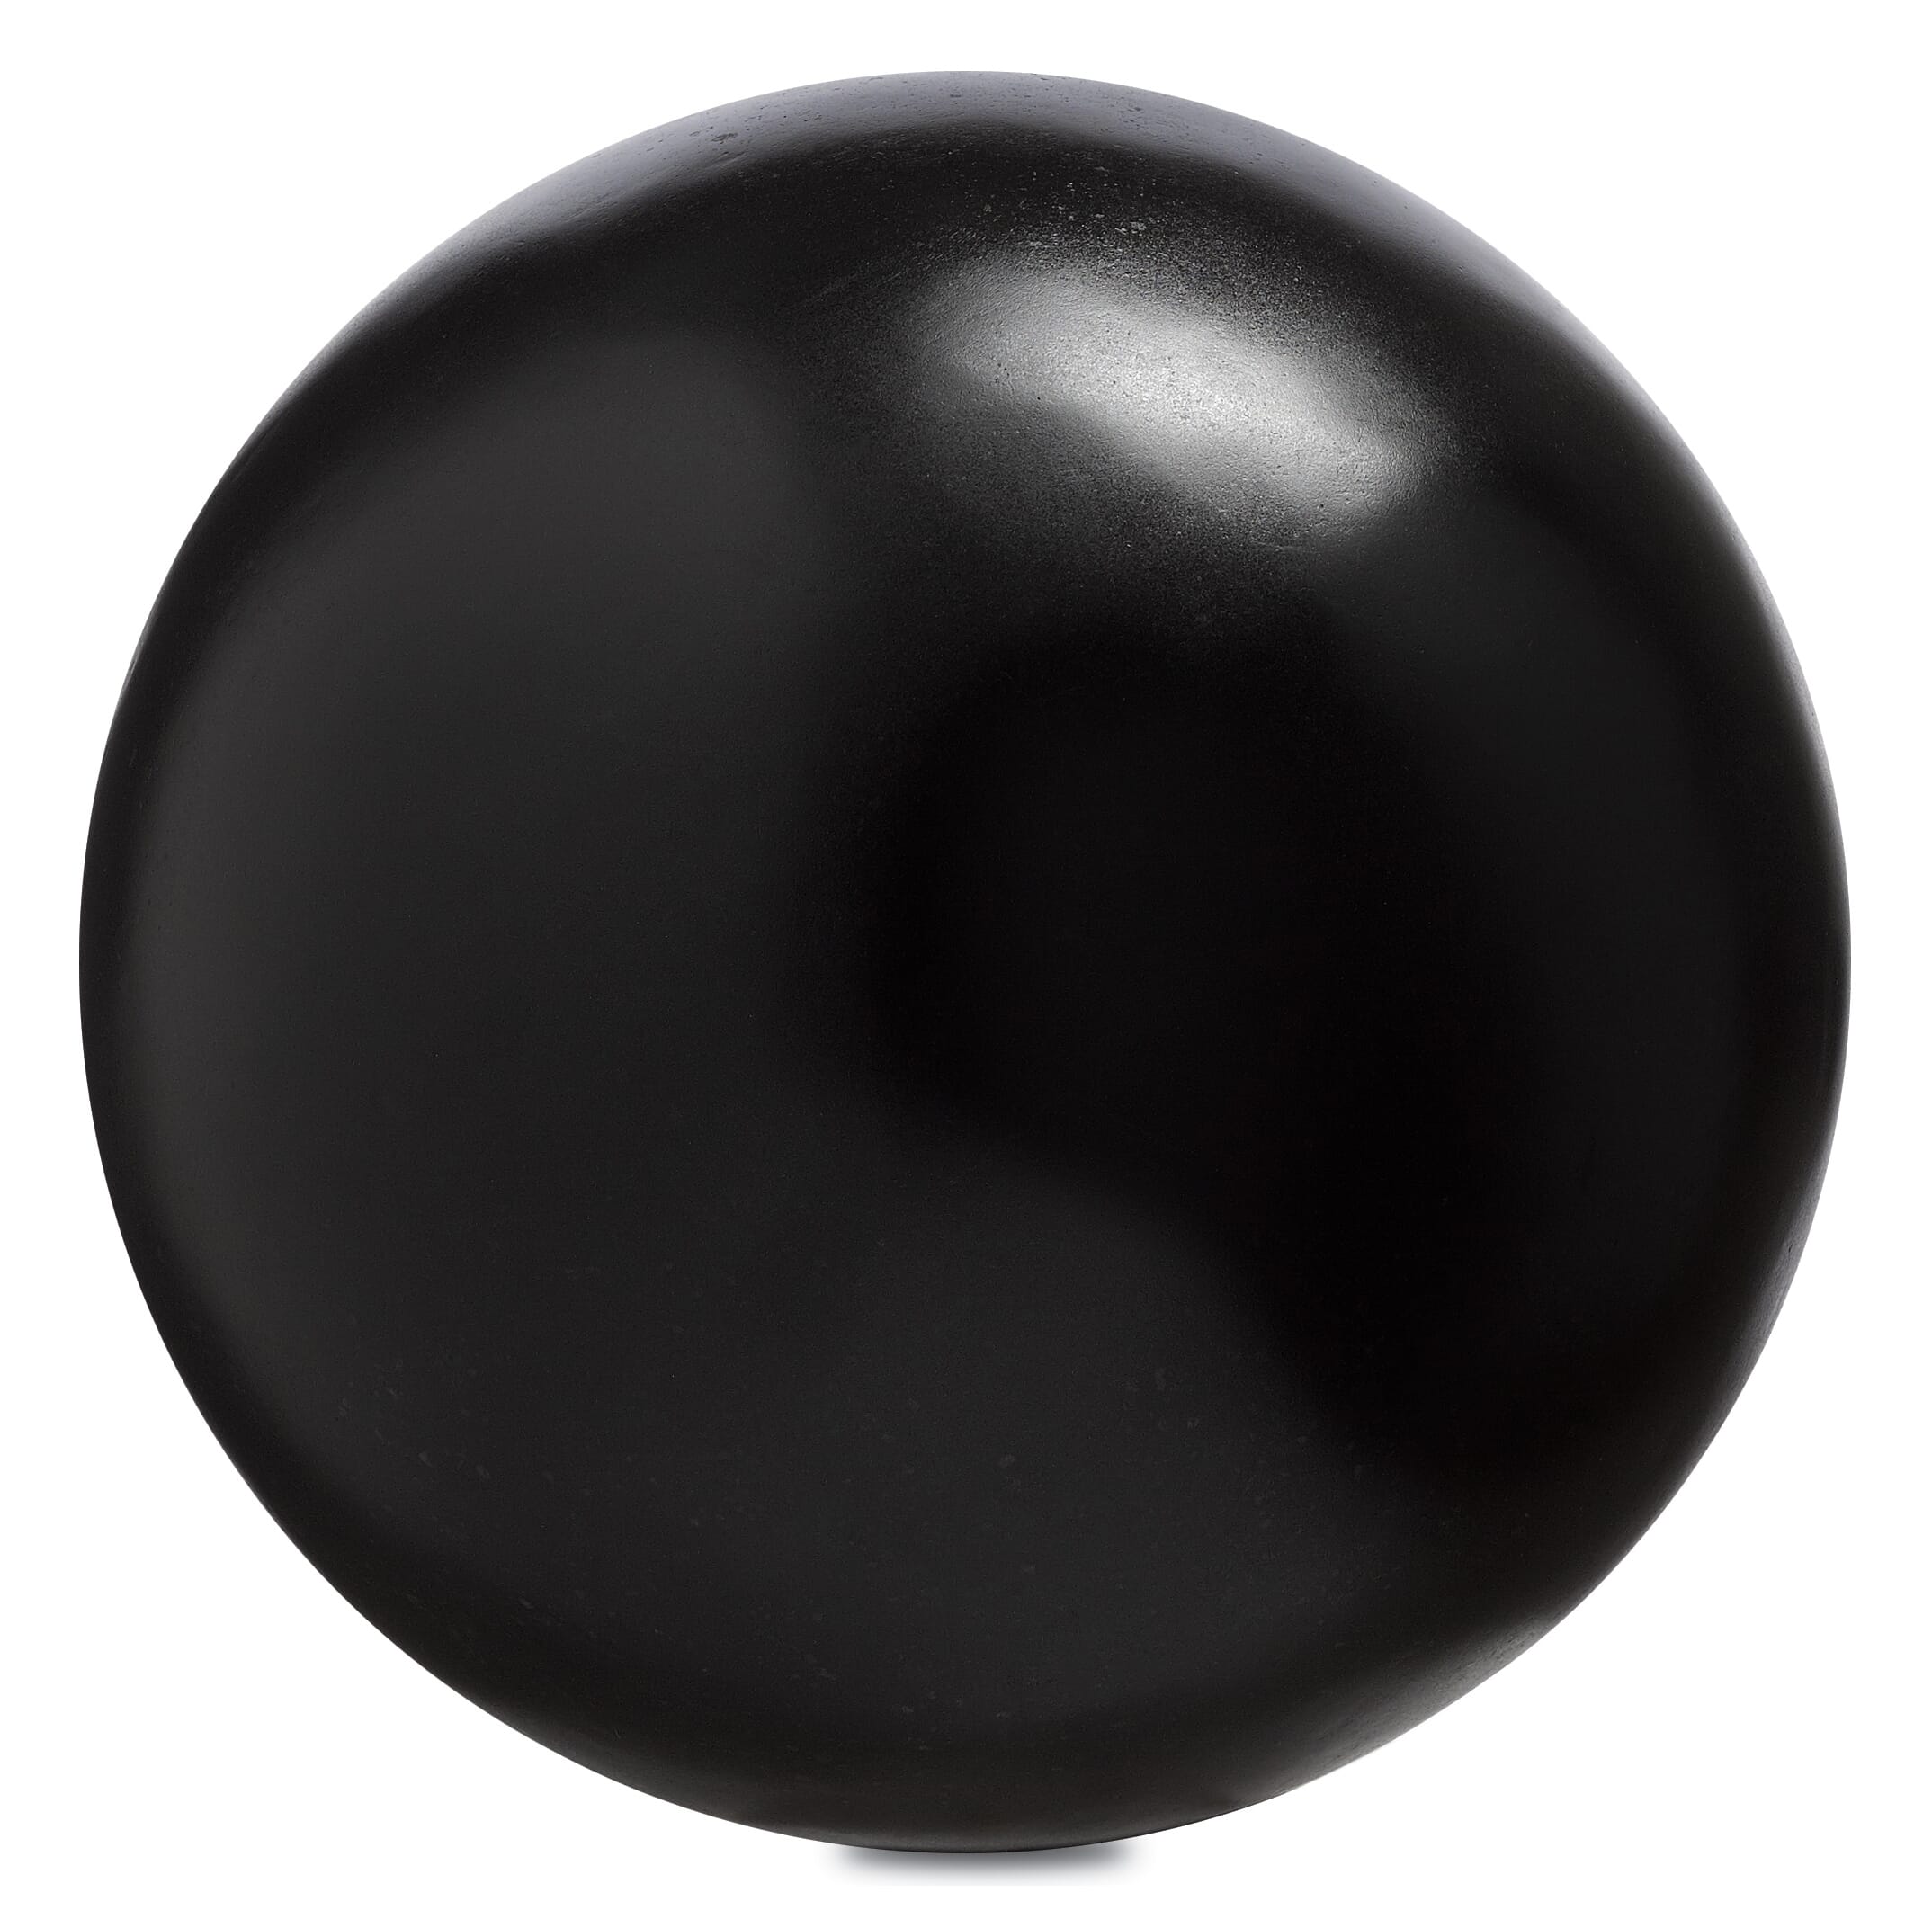 Currey & Company 10" Black Large Concrete Ball in Black